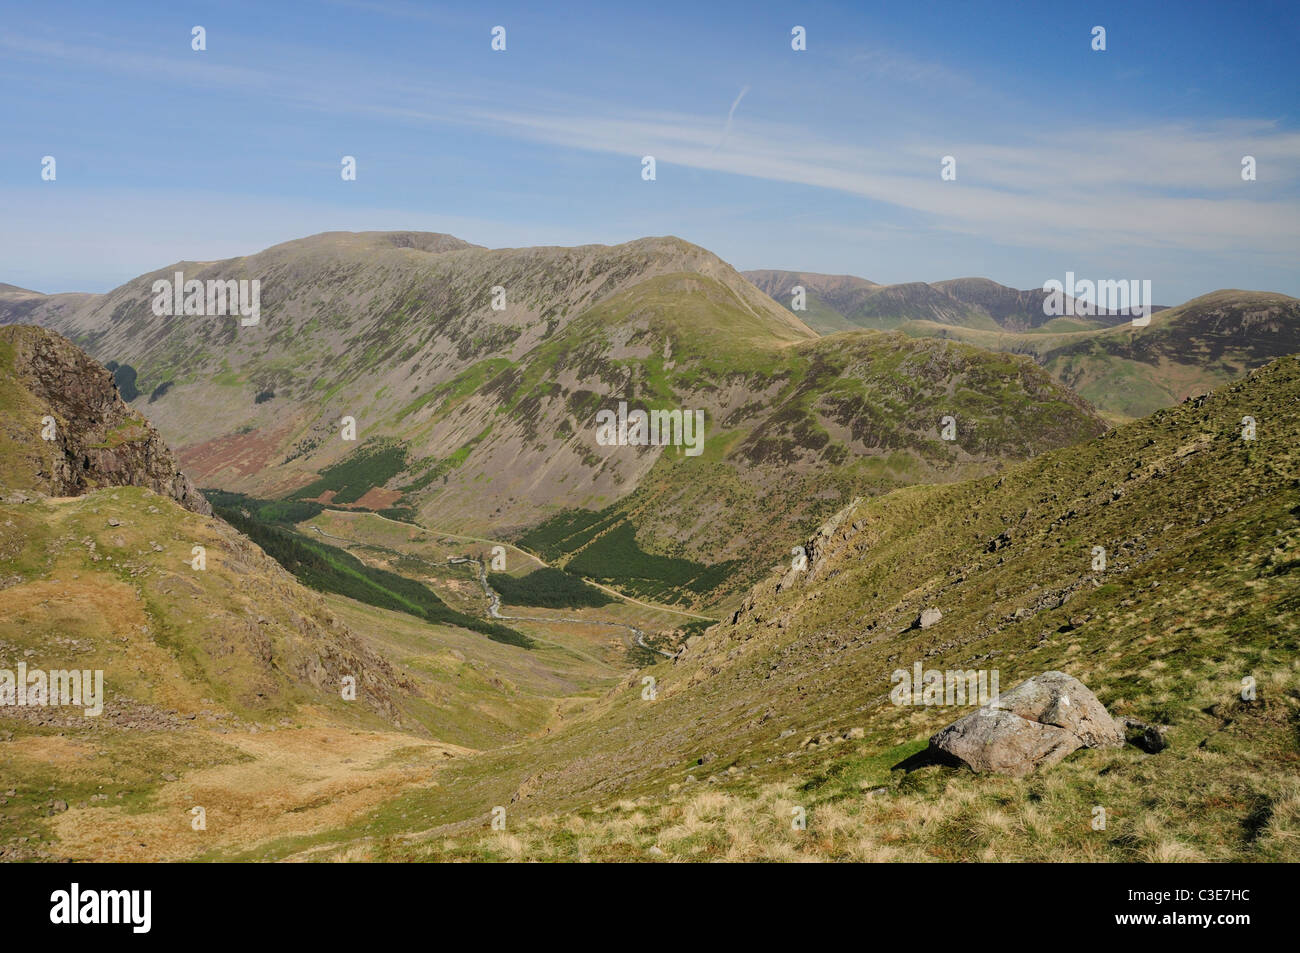 View over Ennerdale Valley from Looking Stead on Pillar towards High Crag and Haystacks, English Lake District Stock Photo